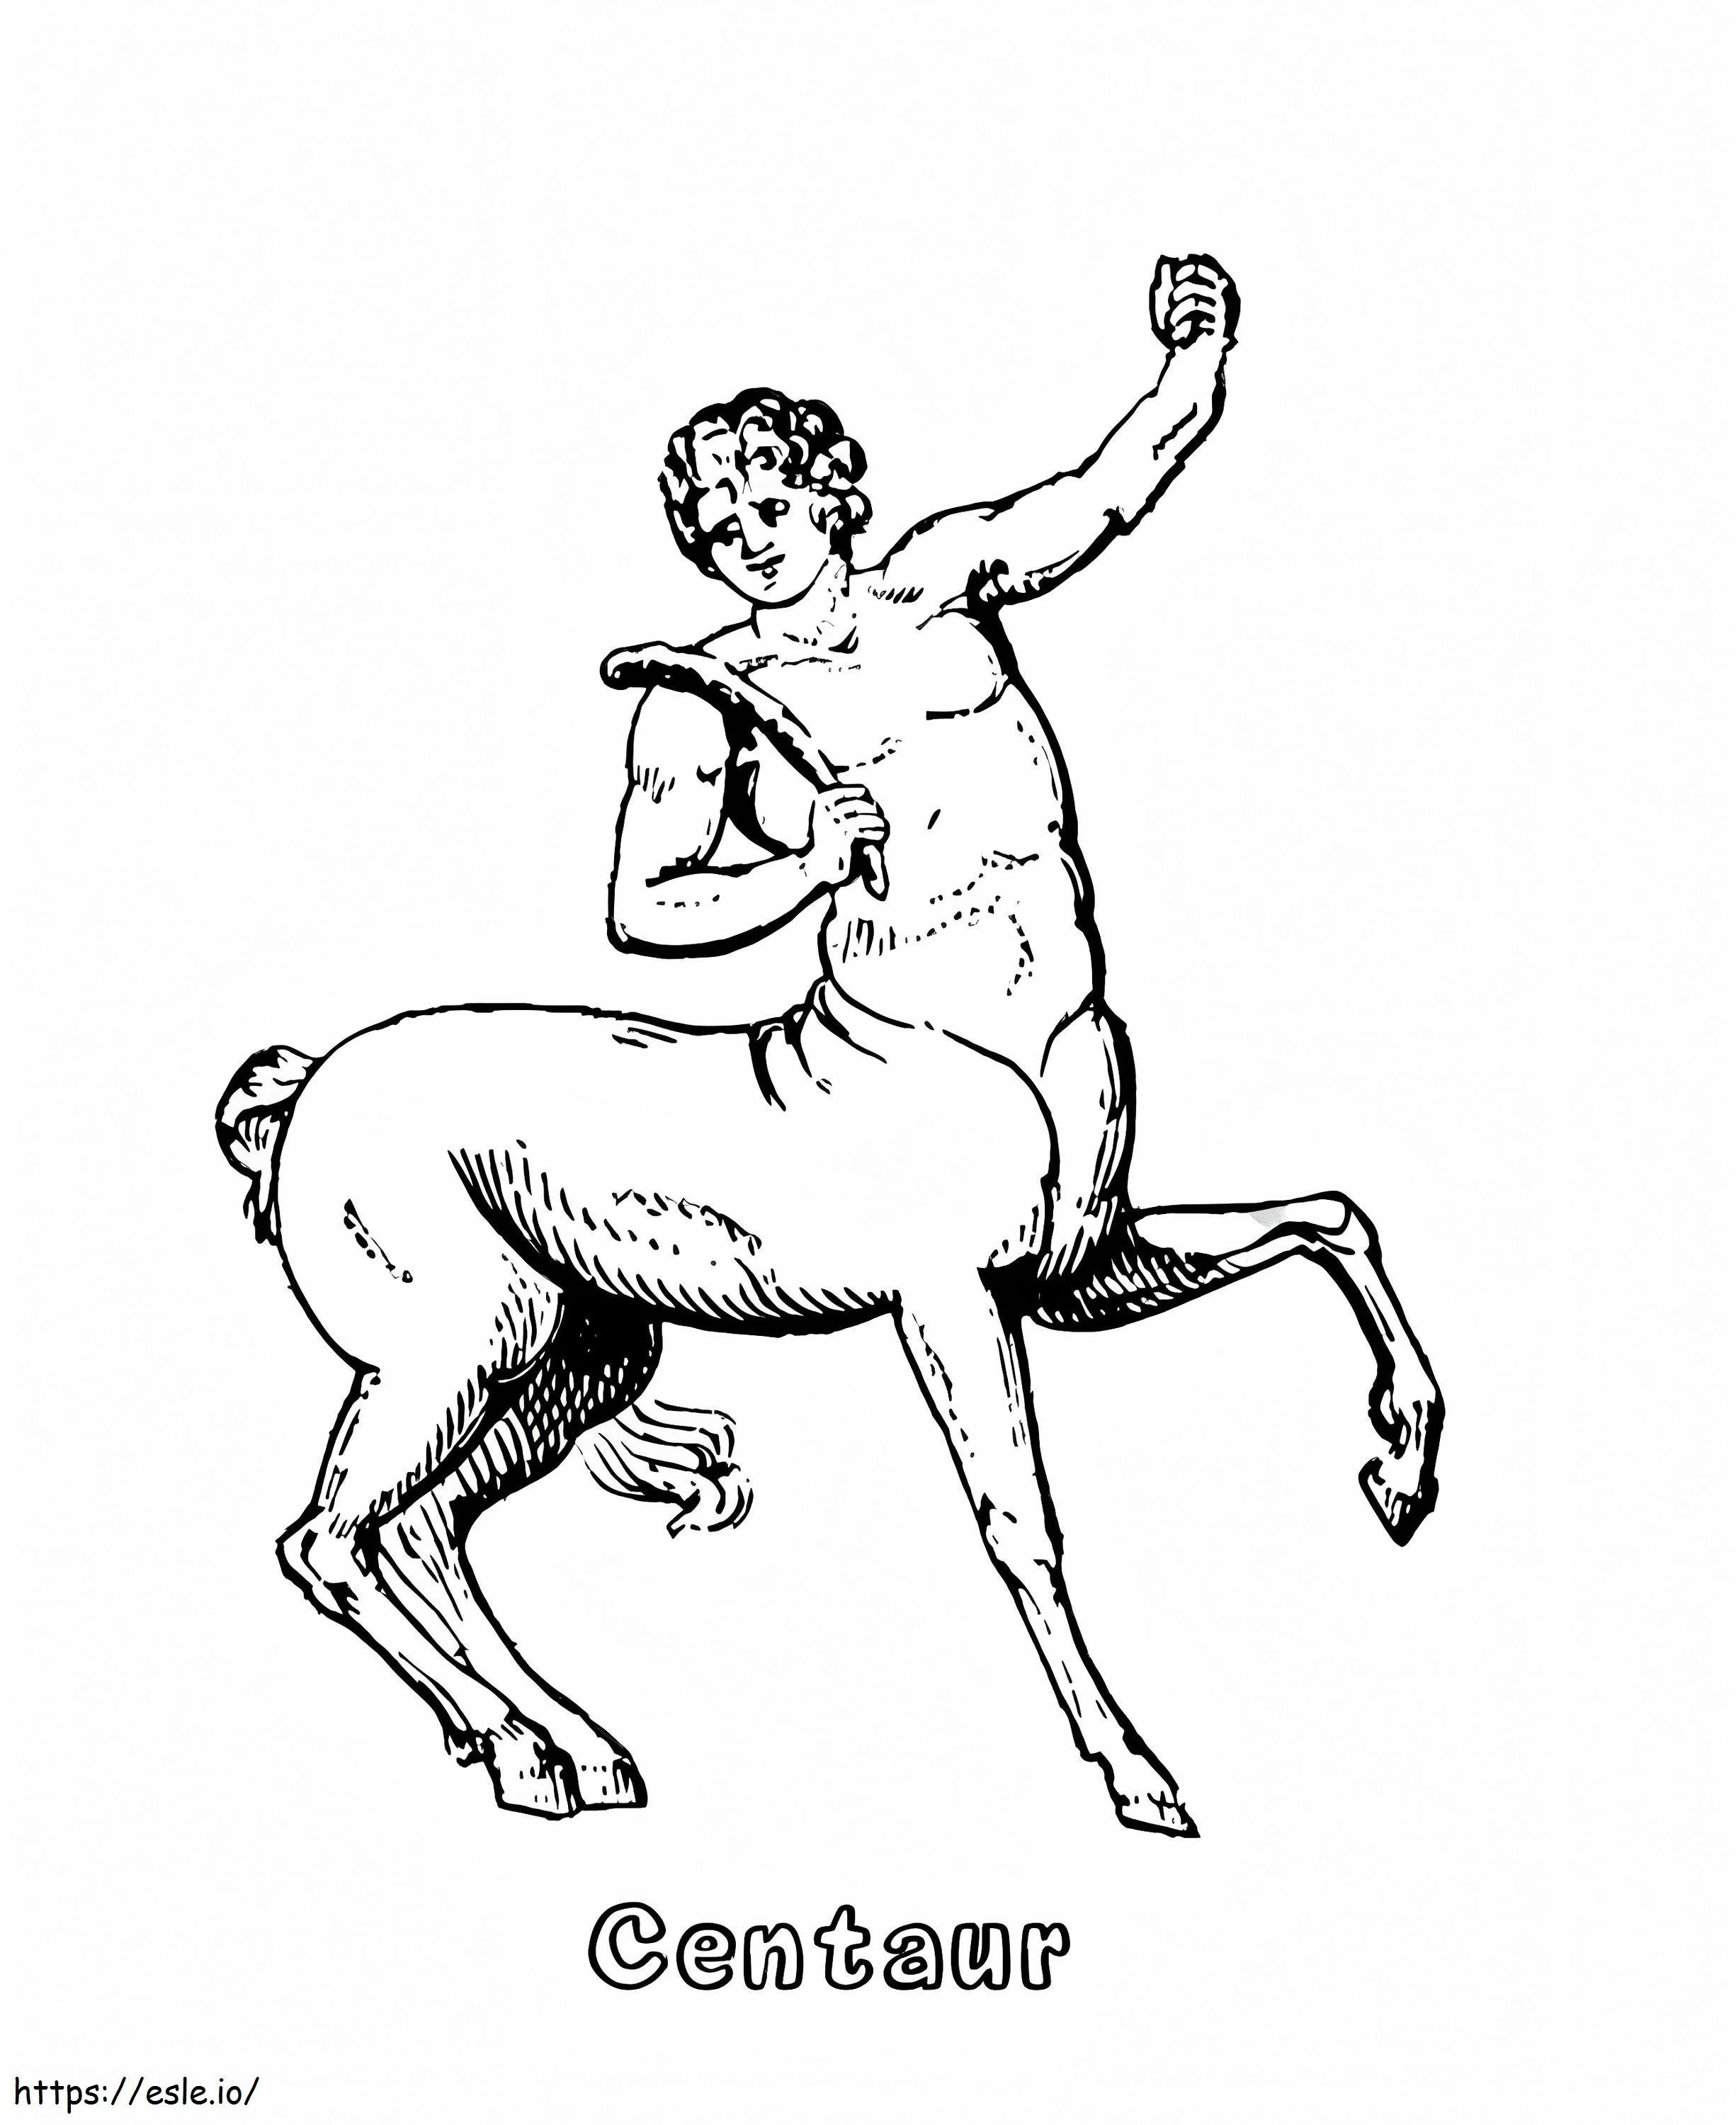 Mythical Centaur coloring page